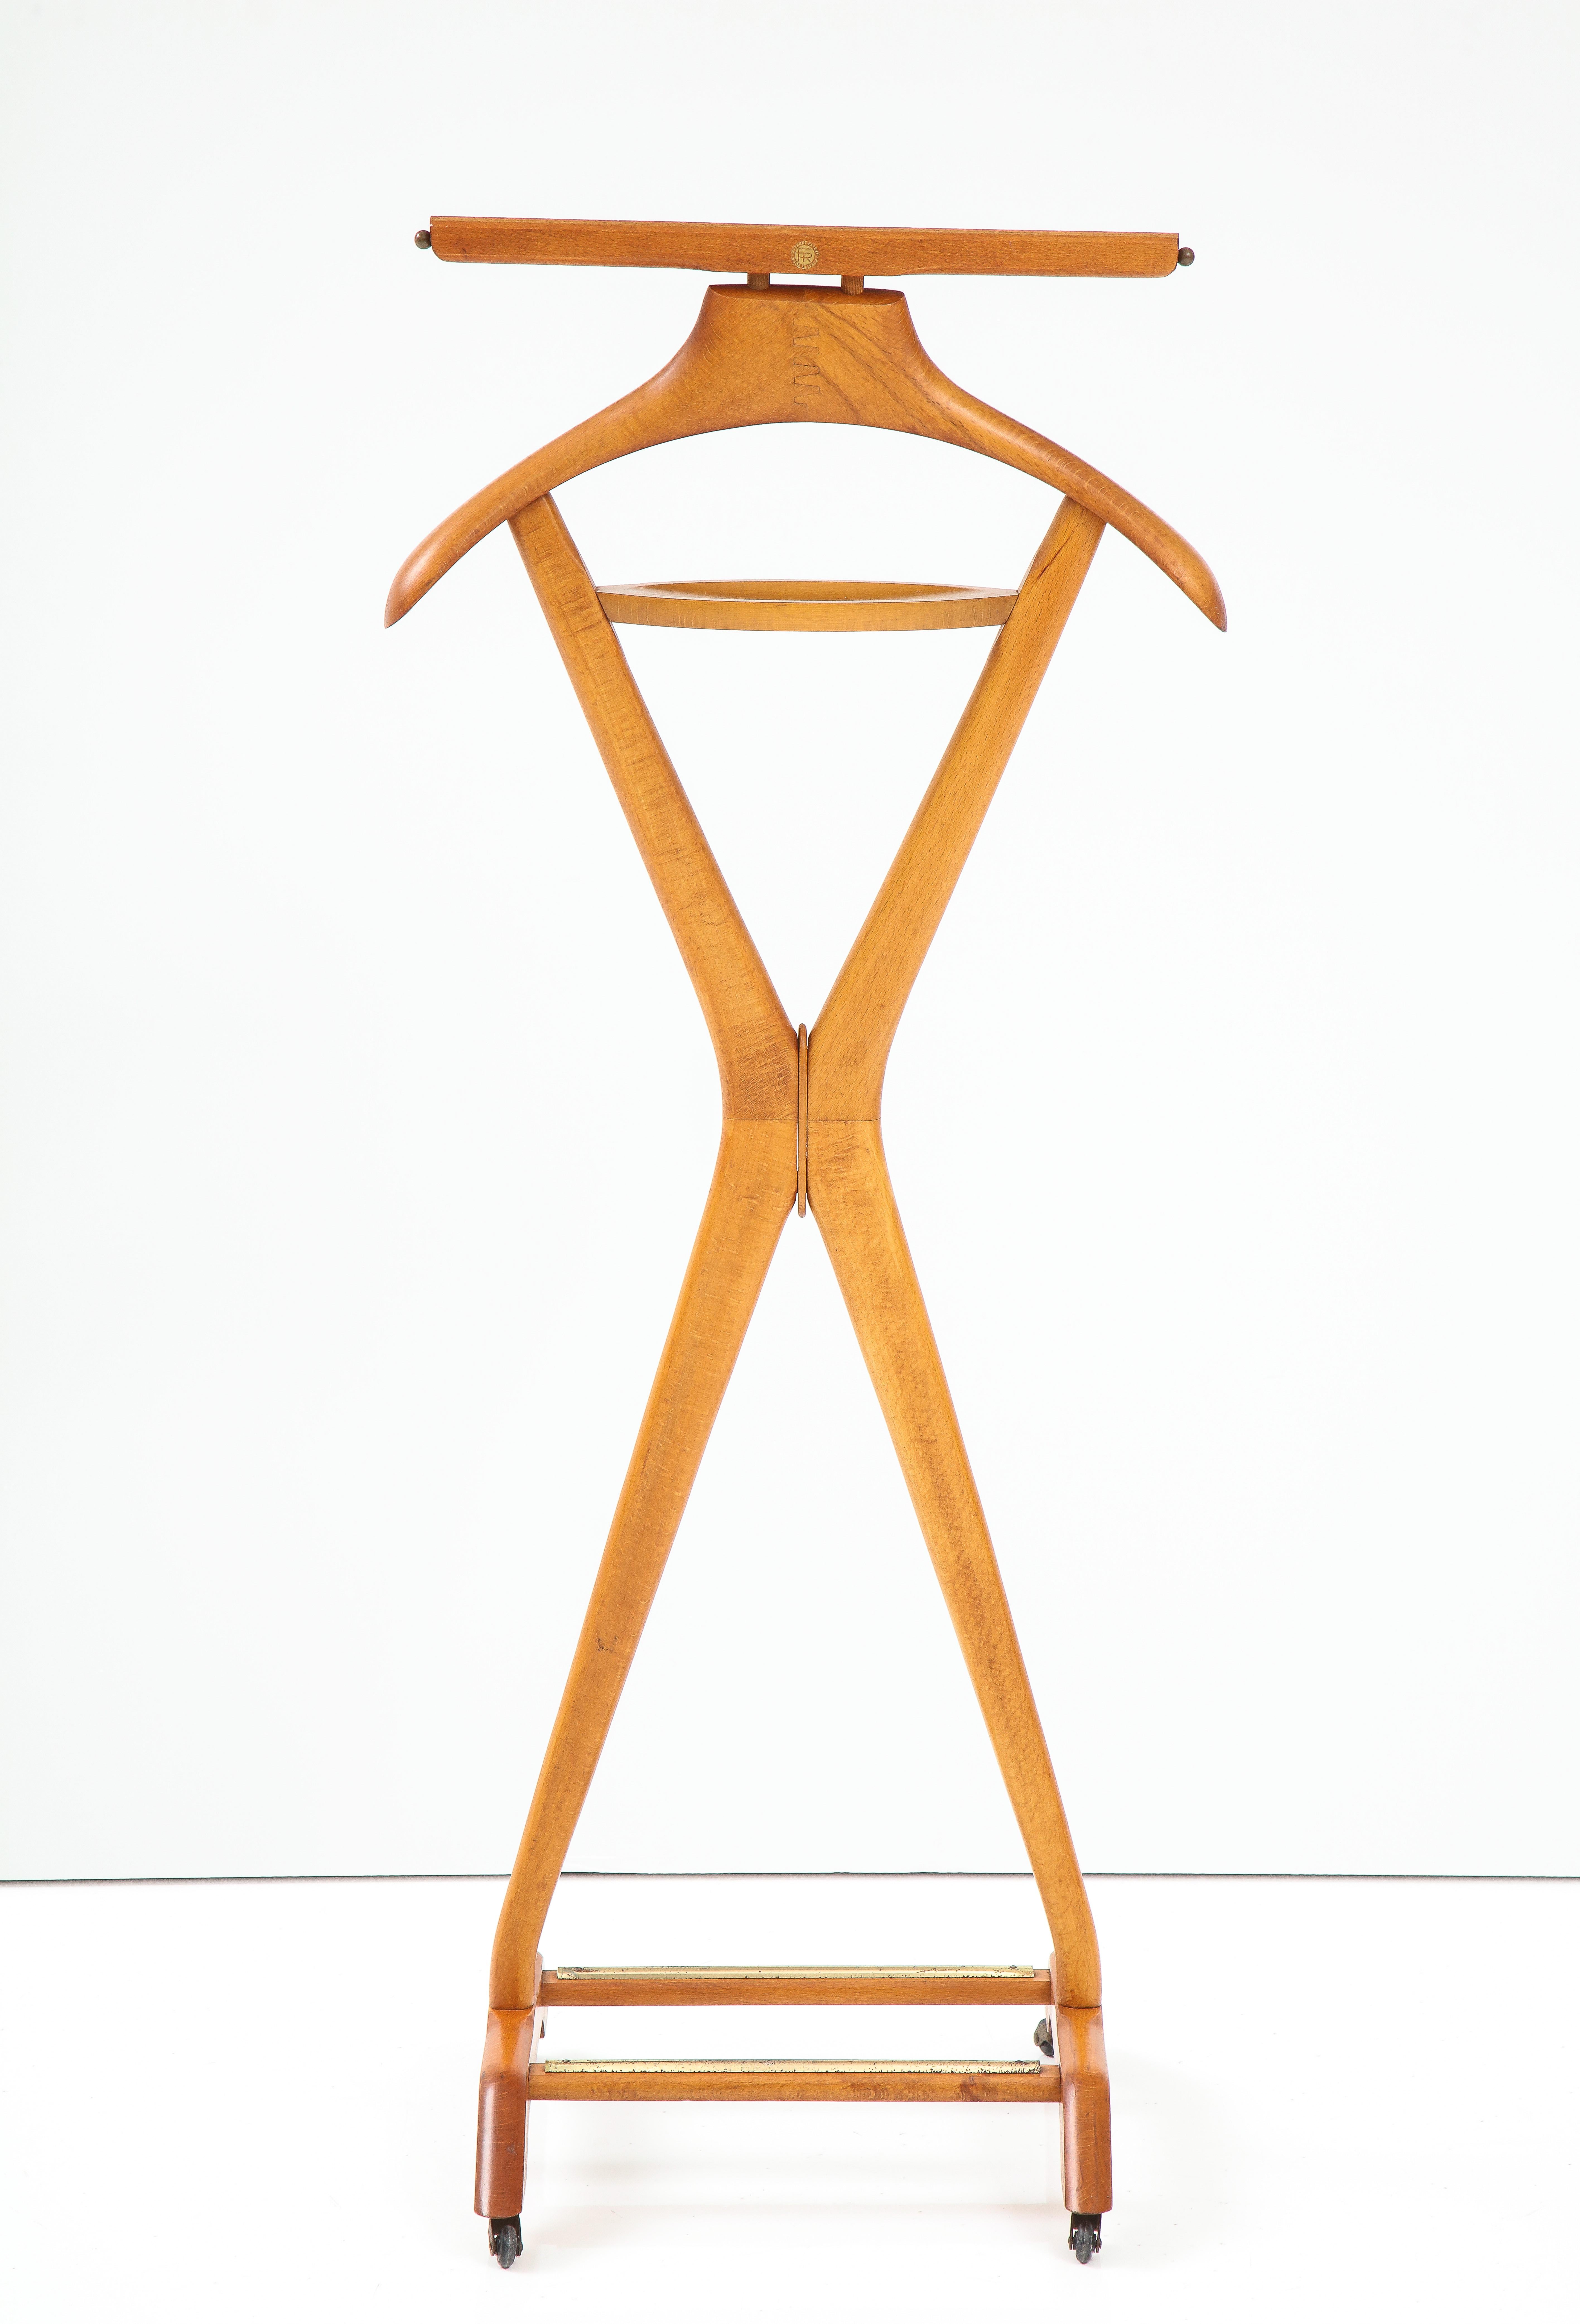 Stunning 1950's sculptural mahogany and brass valet stand designed by Ico & Luisa Parisi for Fratelli Reguitti, in vintage original condition with minor wear and patina due to age and use.